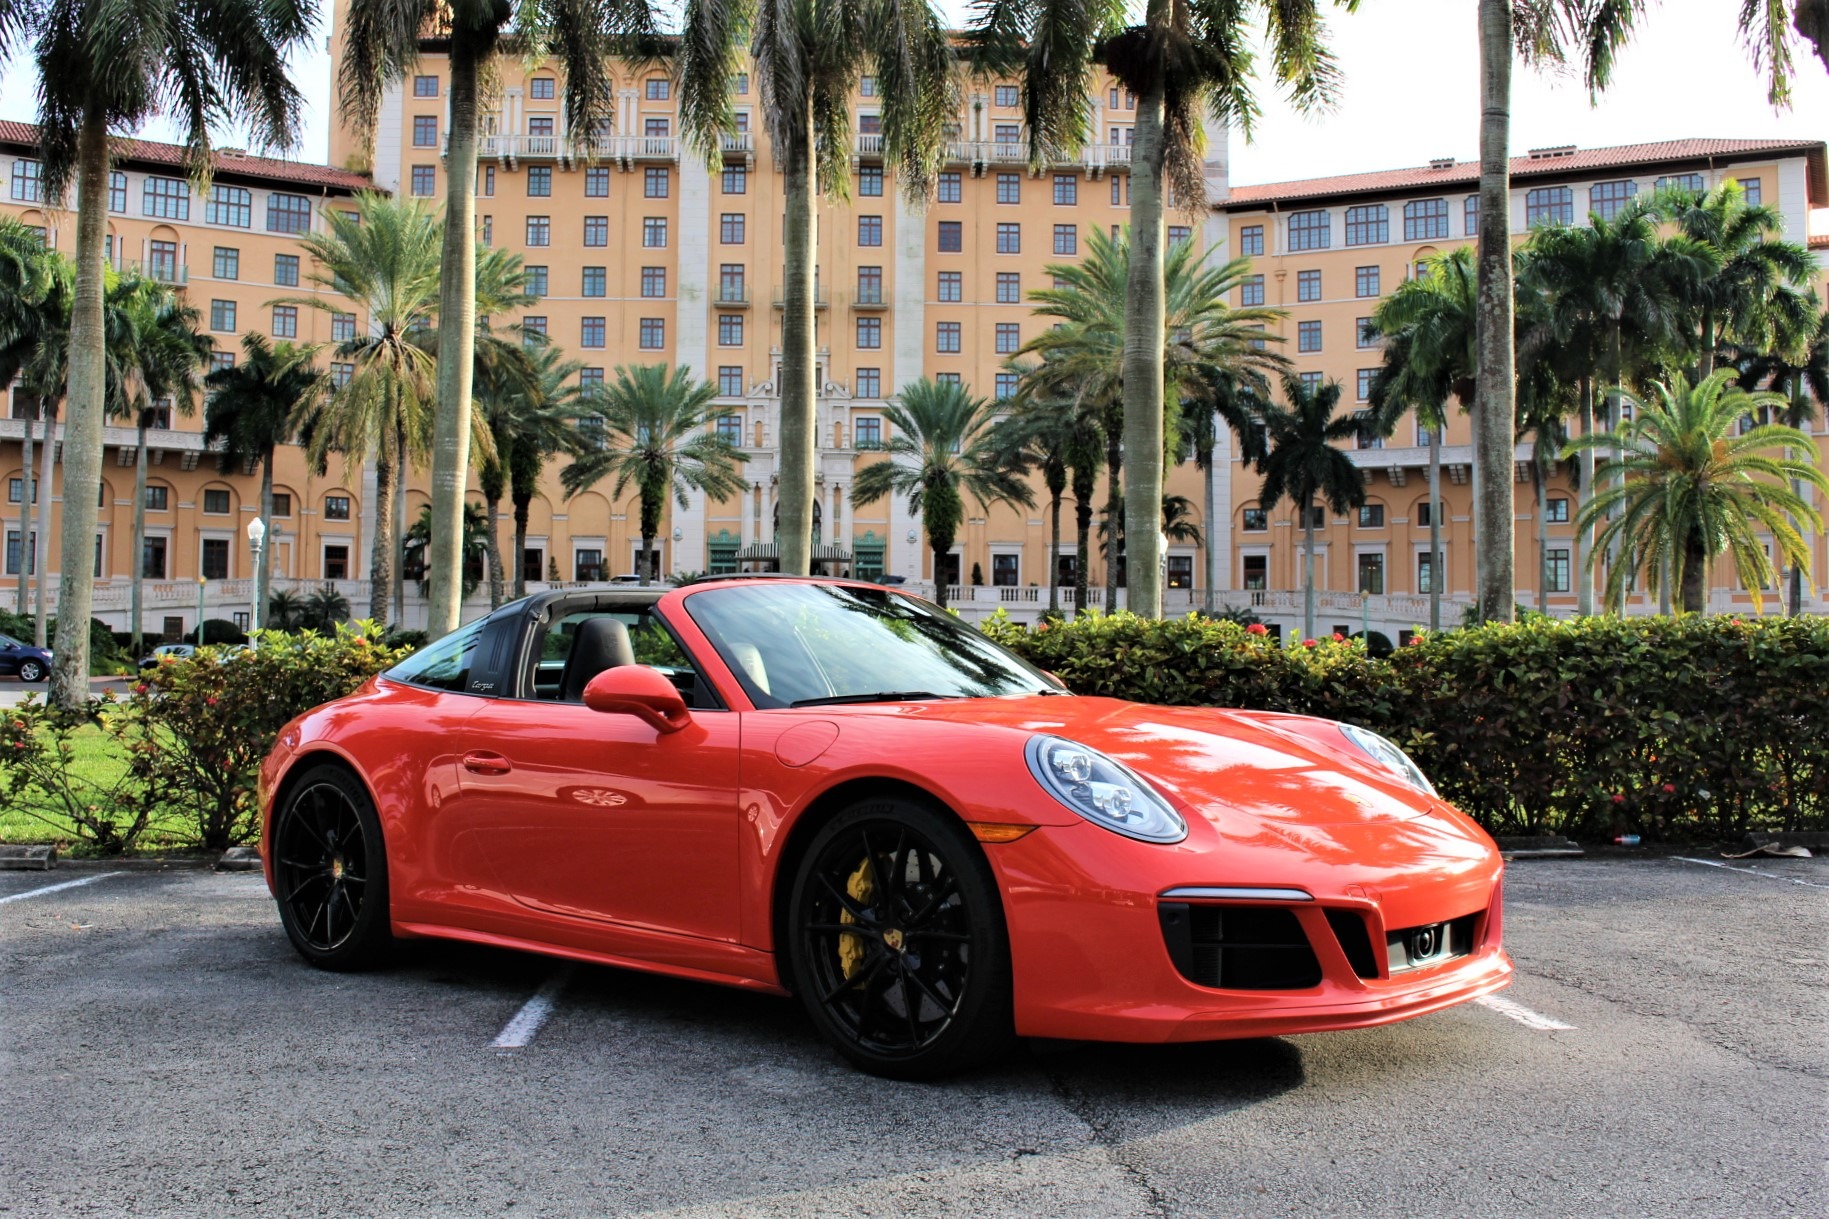 Used 2018 Porsche 911 Targa 4S for sale Sold at The Gables Sports Cars in Miami FL 33146 1